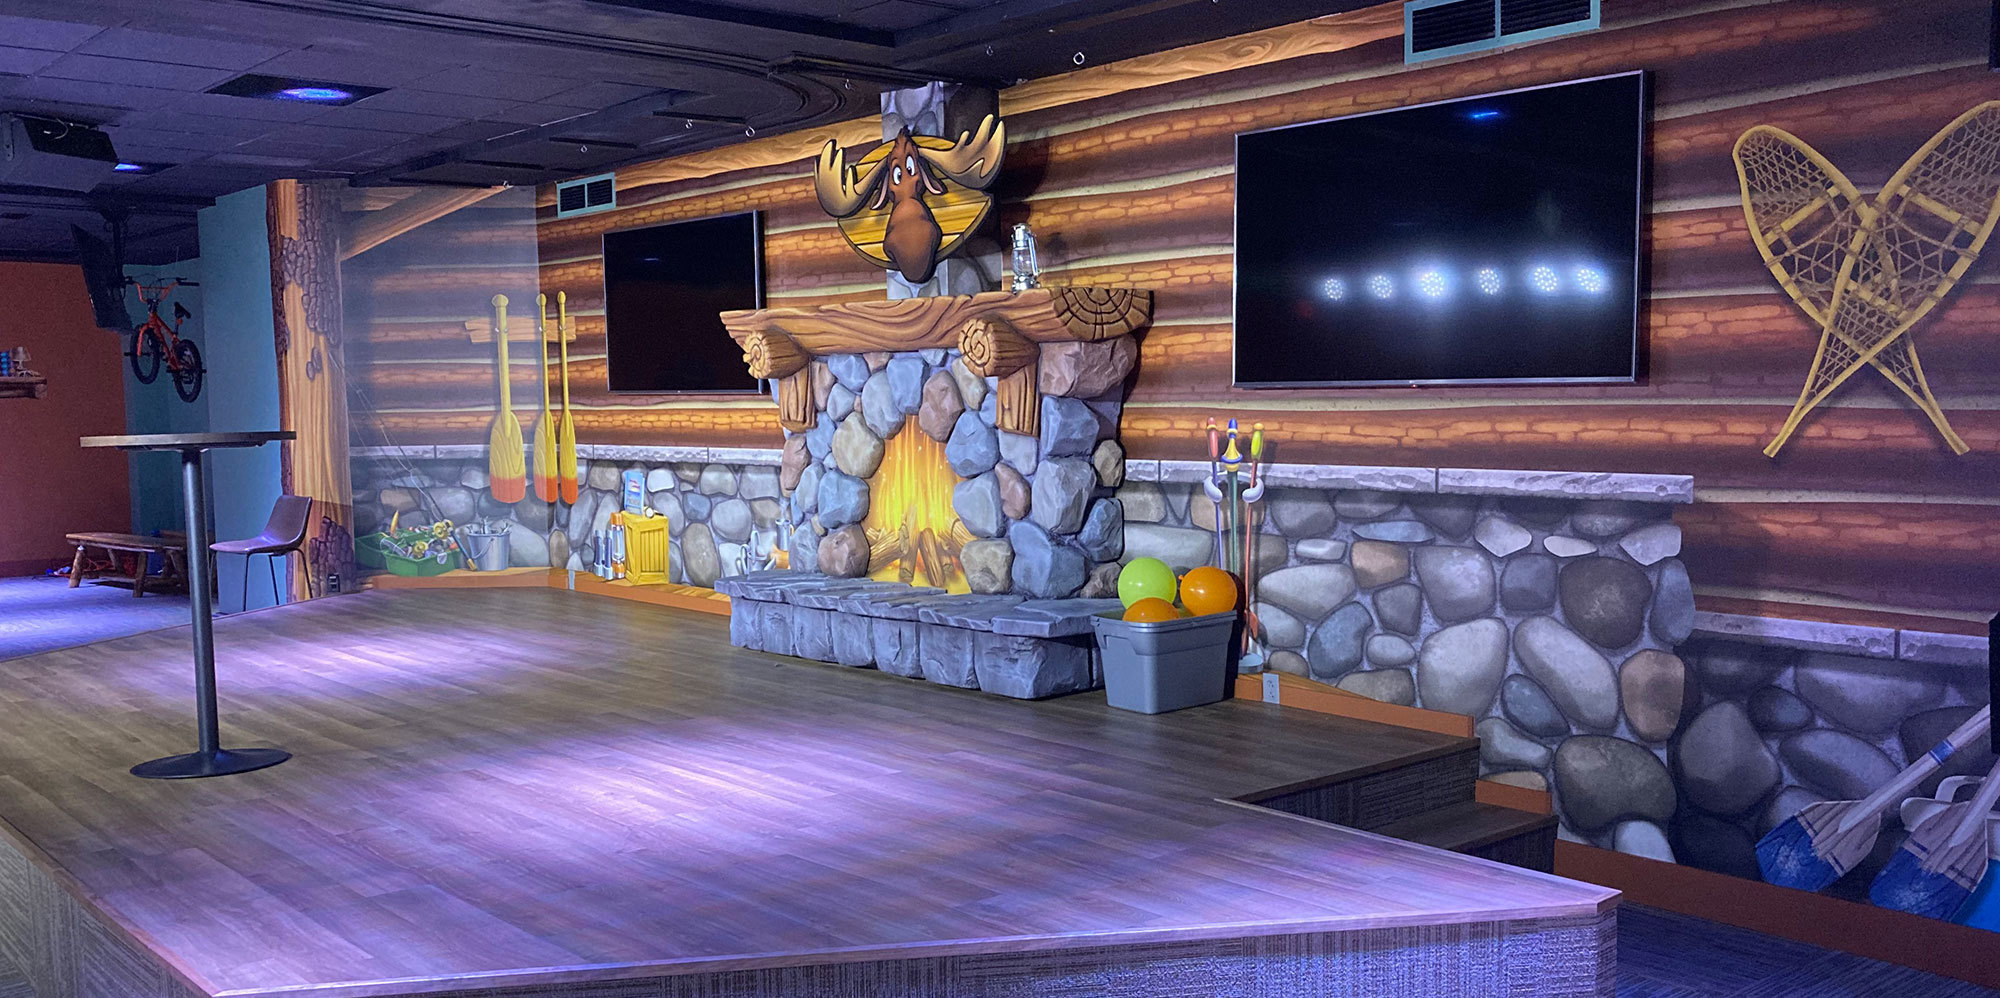 Camping and Lodge Themed Stage with background mural of lodge interior wall and 3D relief sculpted fireplace and moose head,